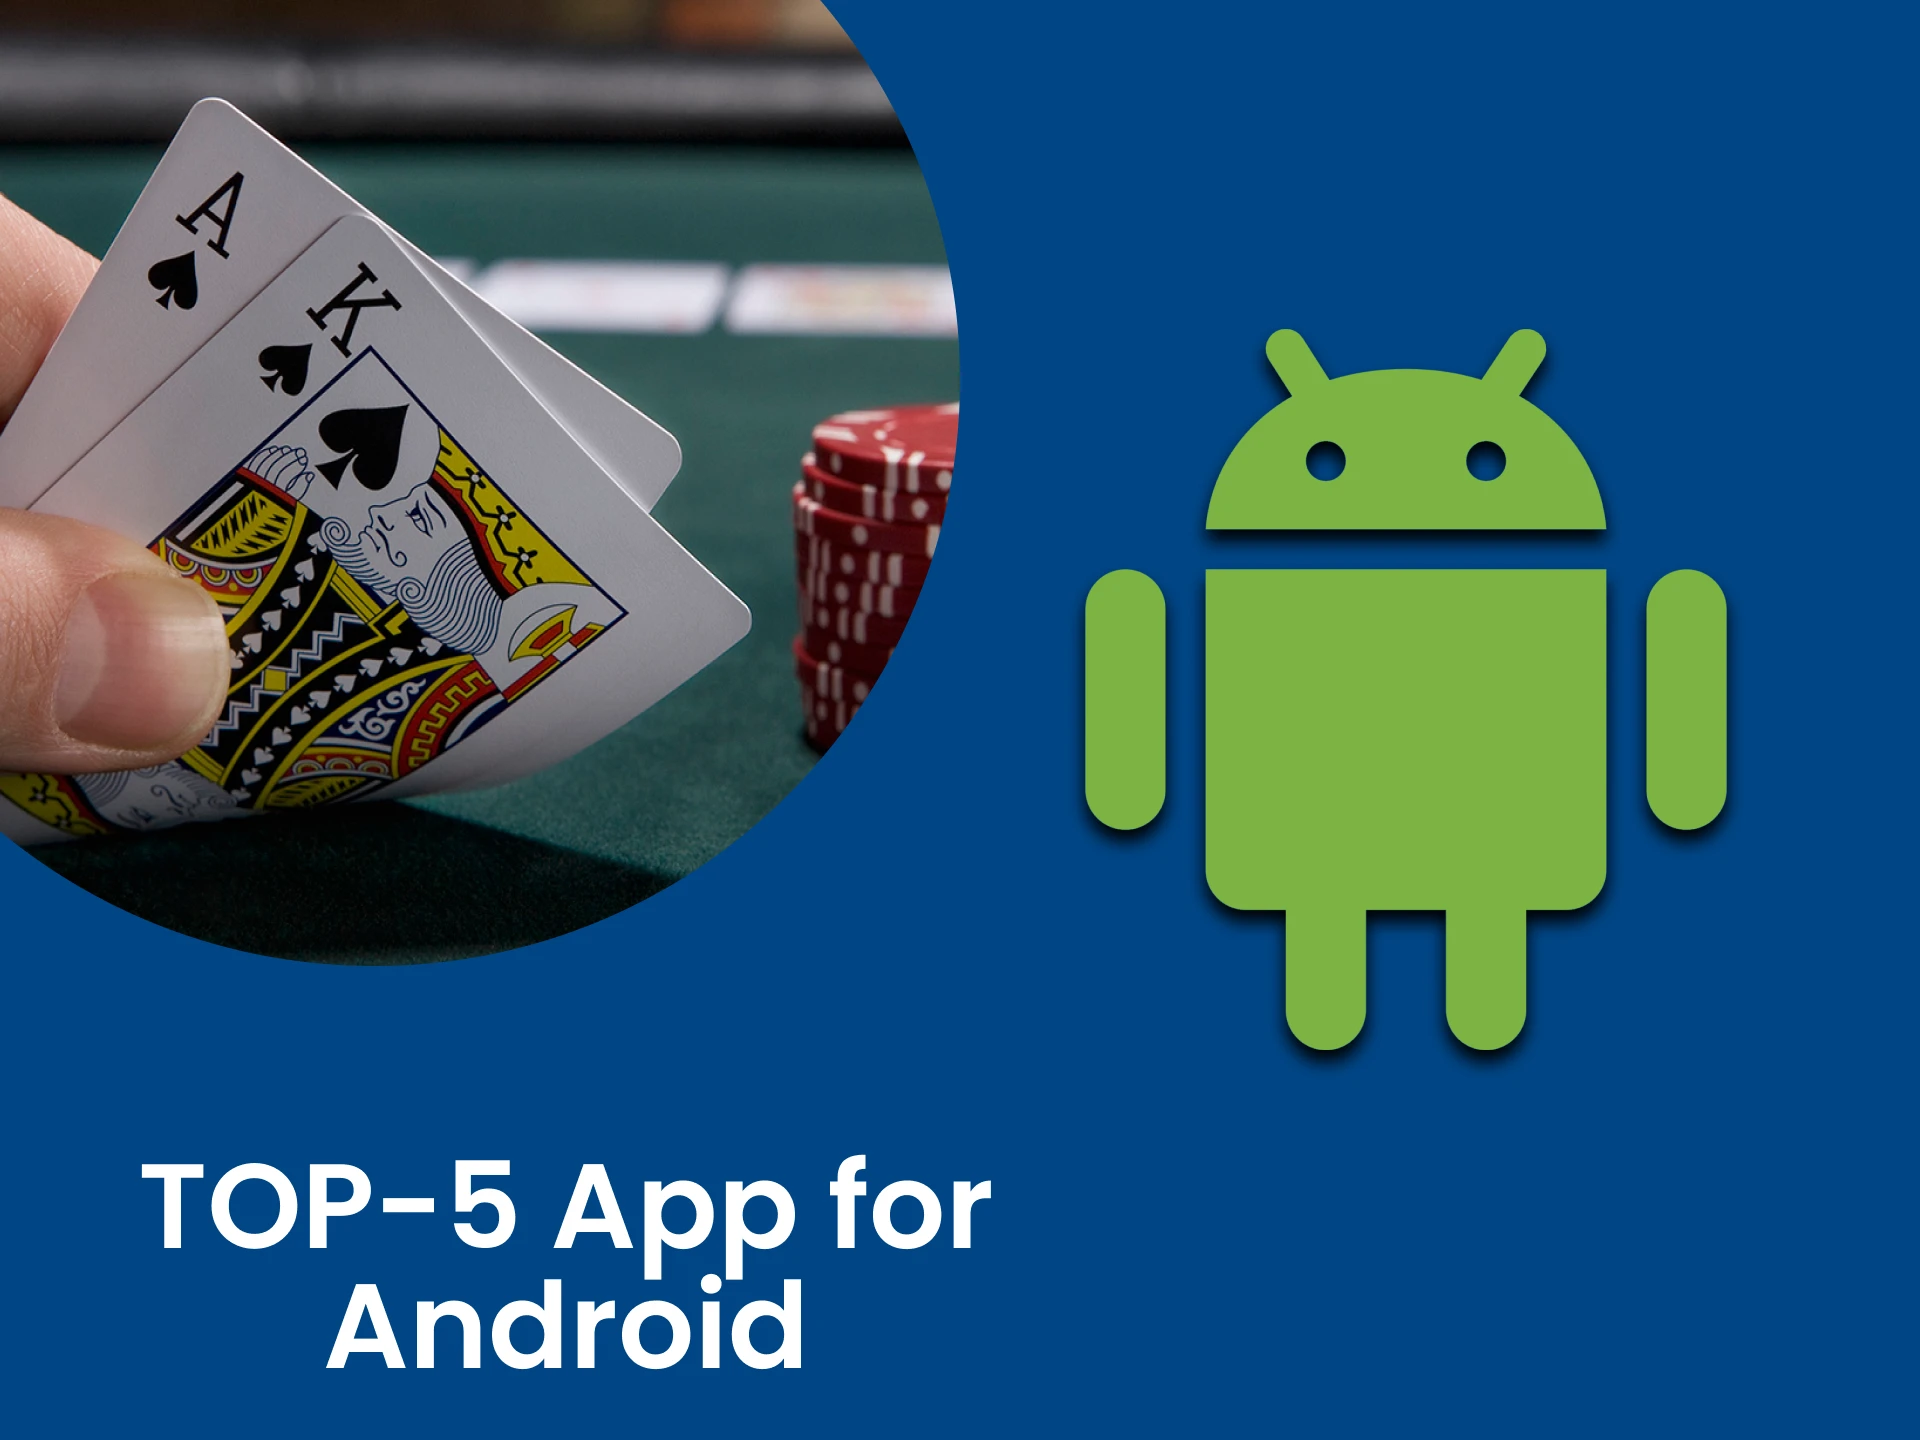 We will tell you about the best applications for playing BlackJack on Android.